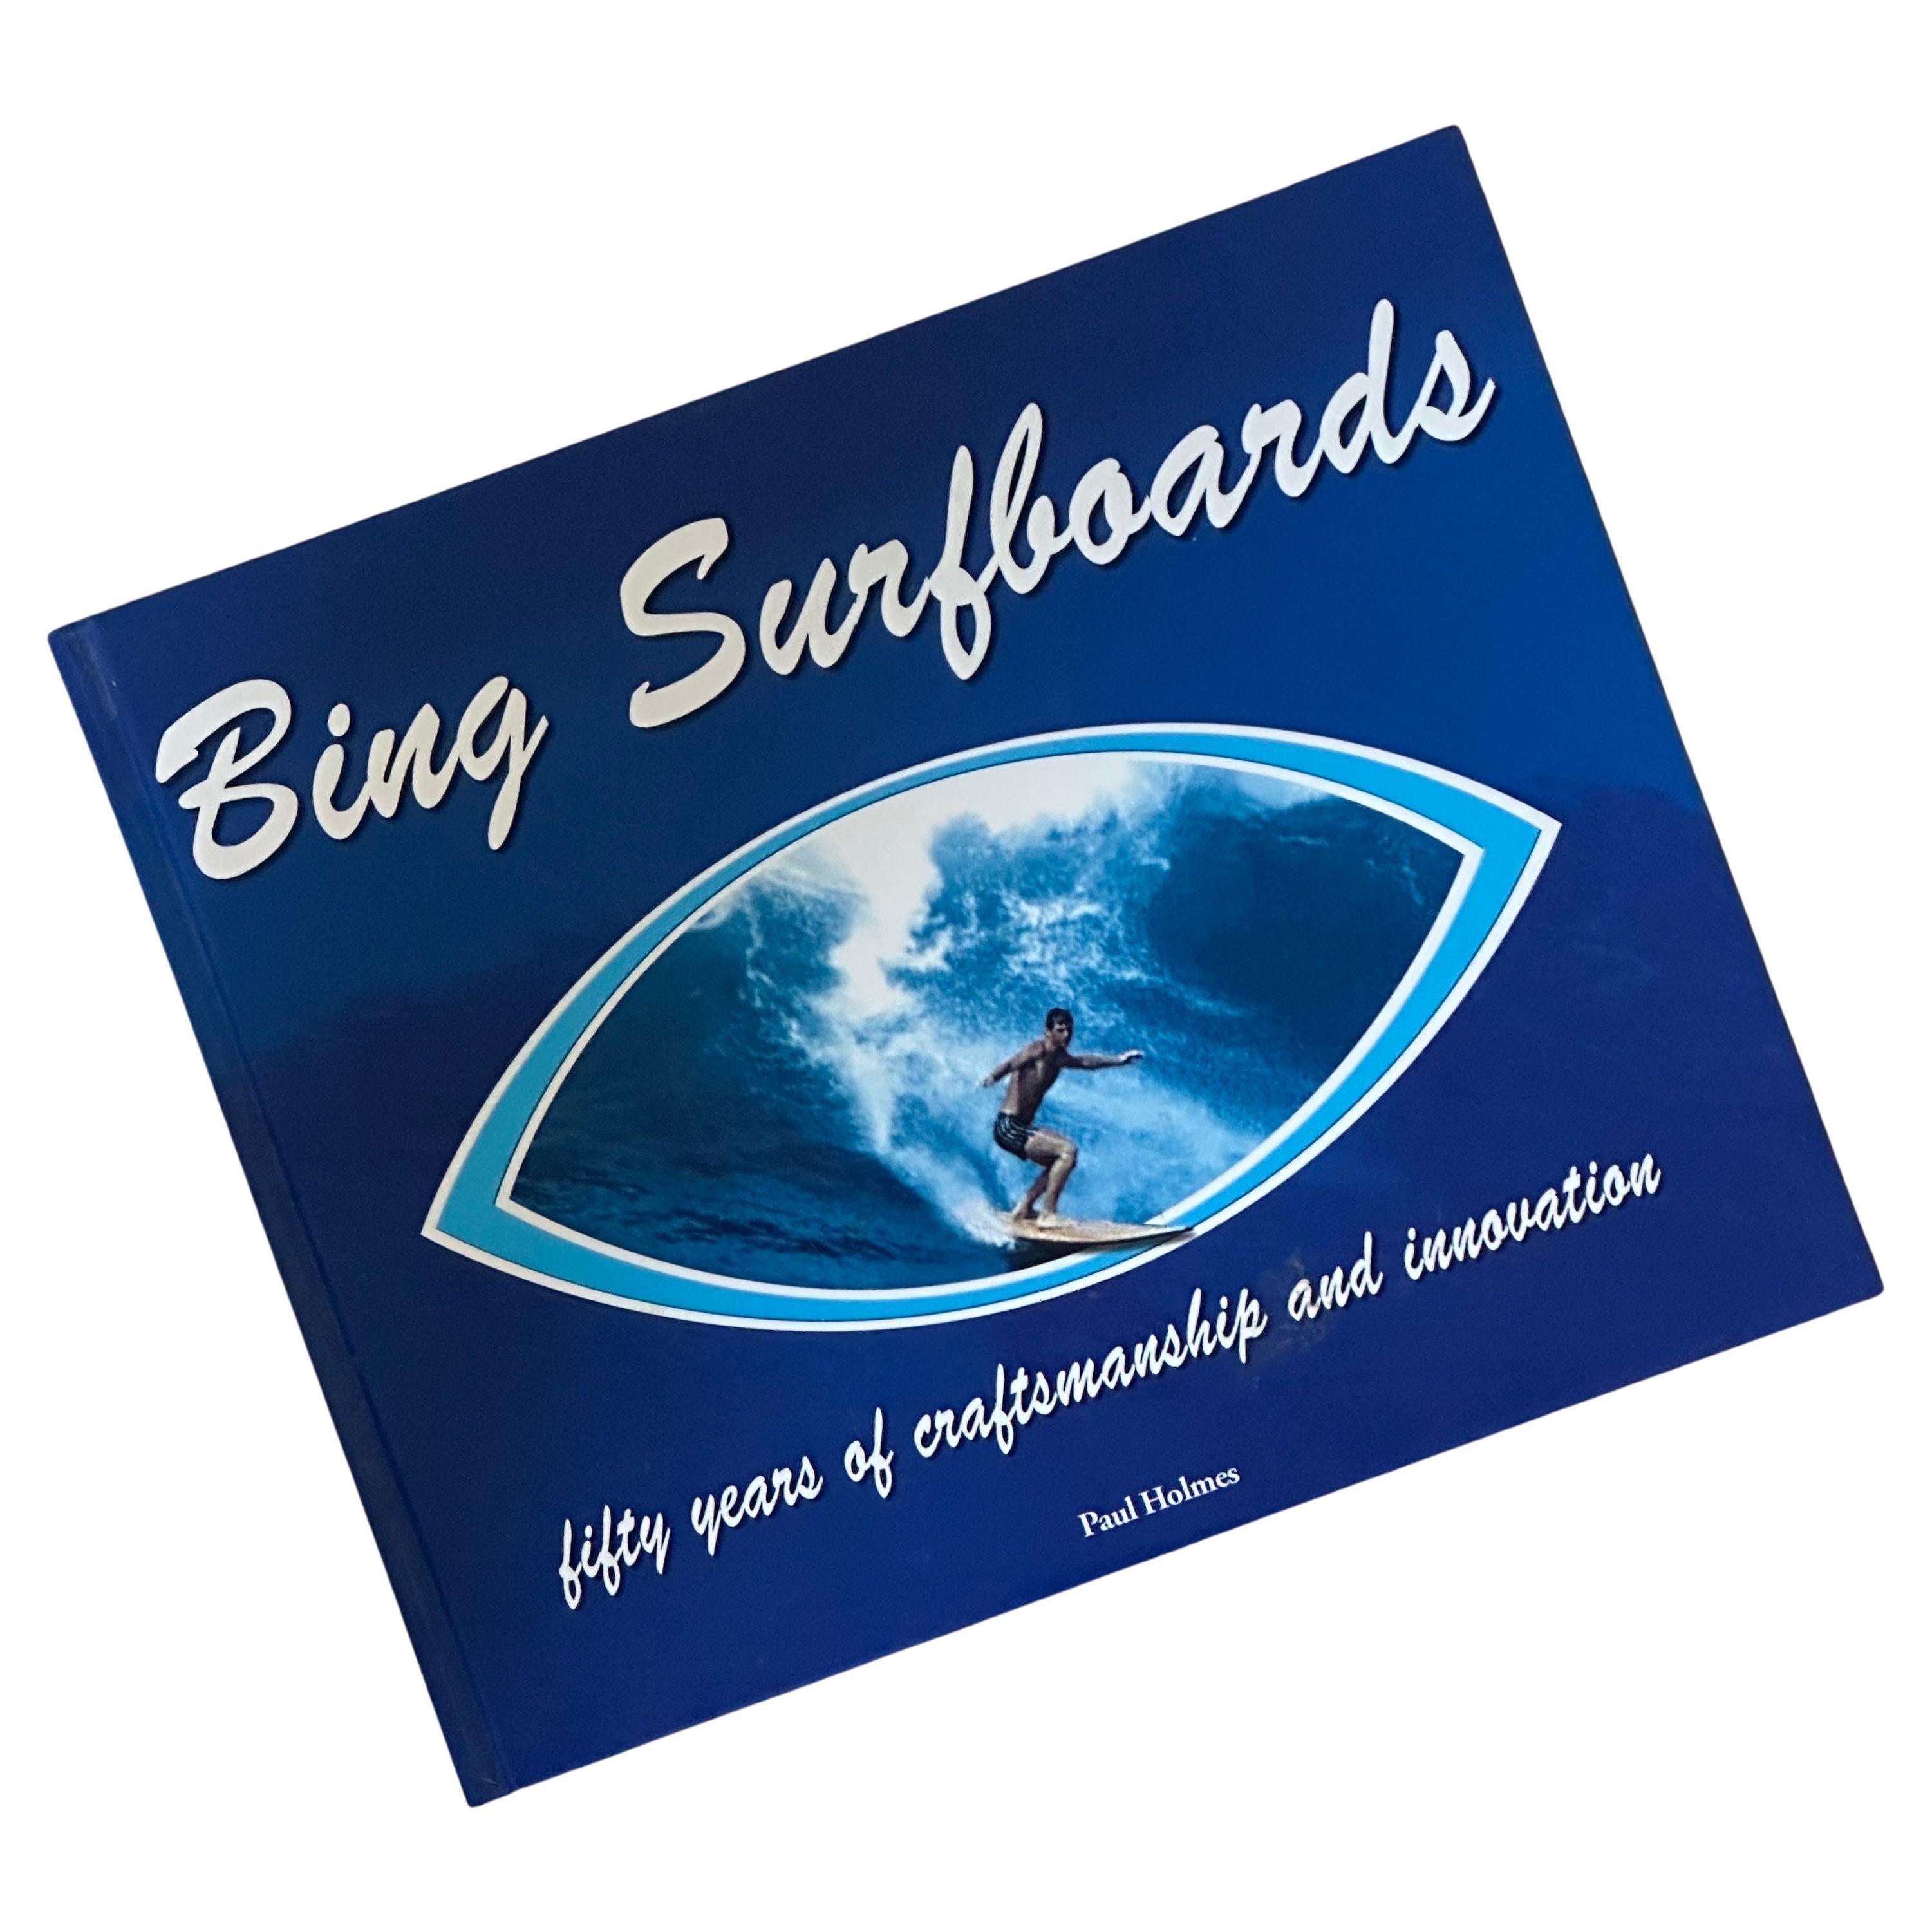 "Bing Surfboards" Book by Paul Hoimes Signed by Bing Copeland - First Edition For Sale